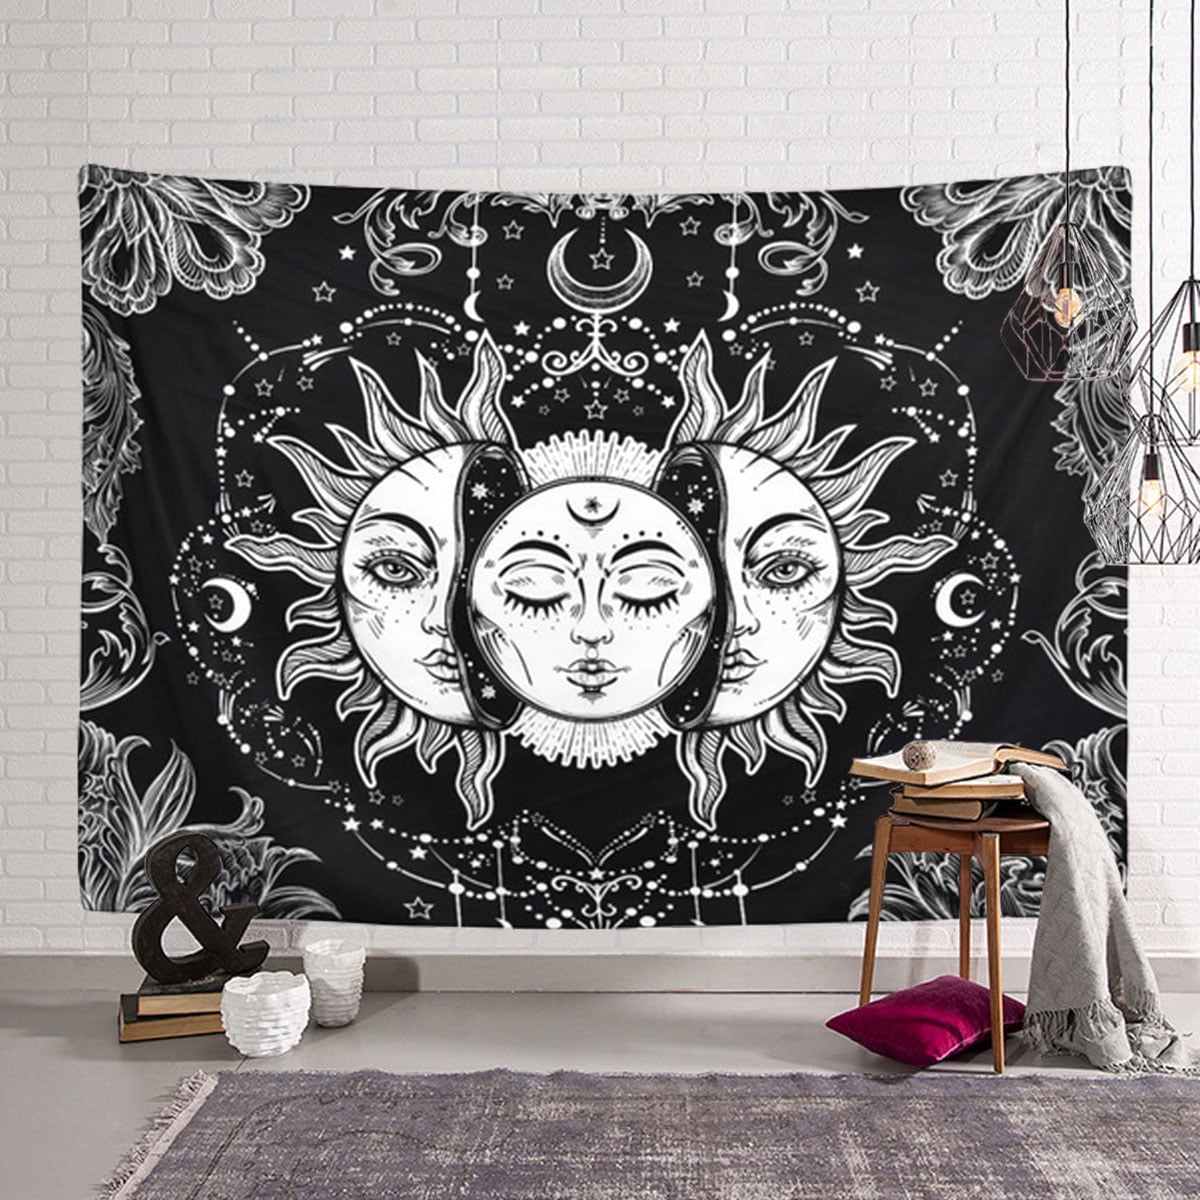 Dark Style Gothic Tapestry Psychedelic Wall Hanging Blanket Art Home Wall Decor 